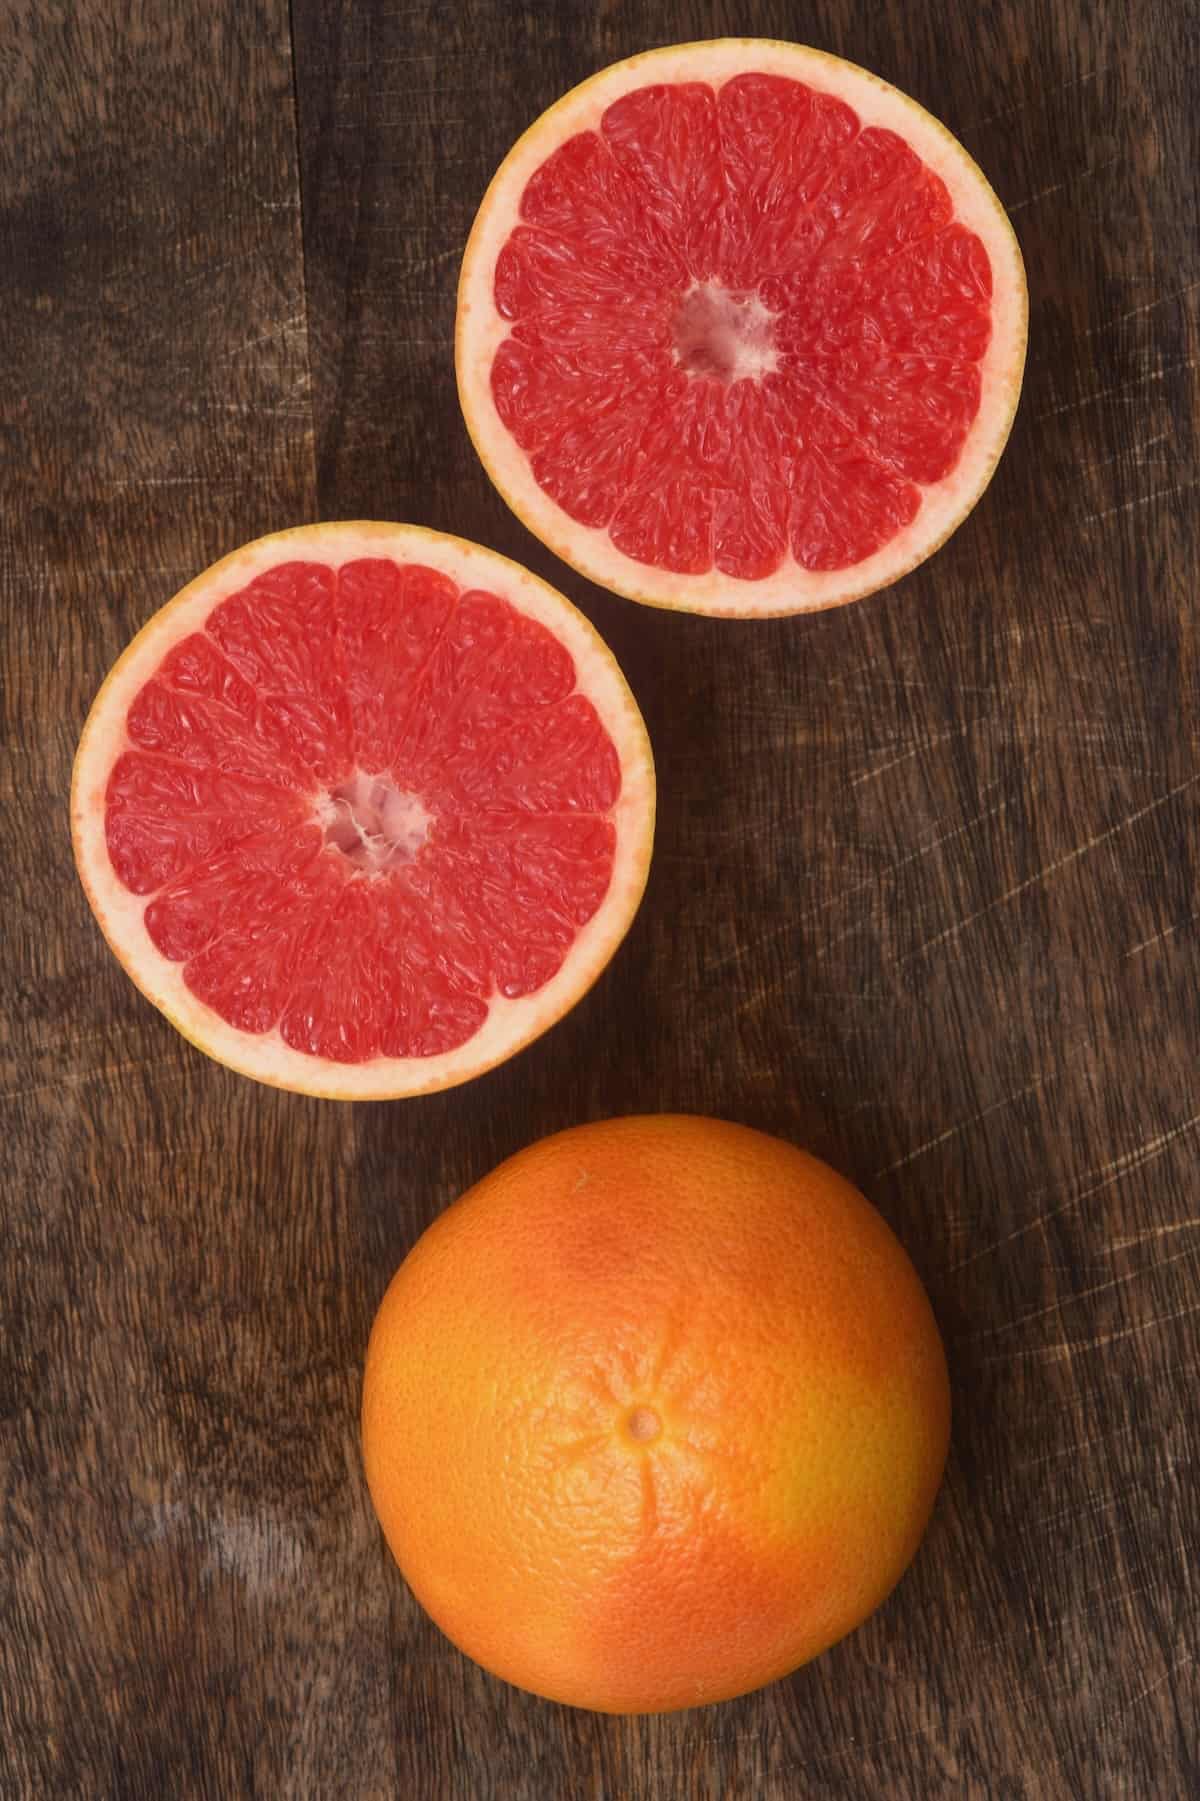 One whole grapefruit and one halved